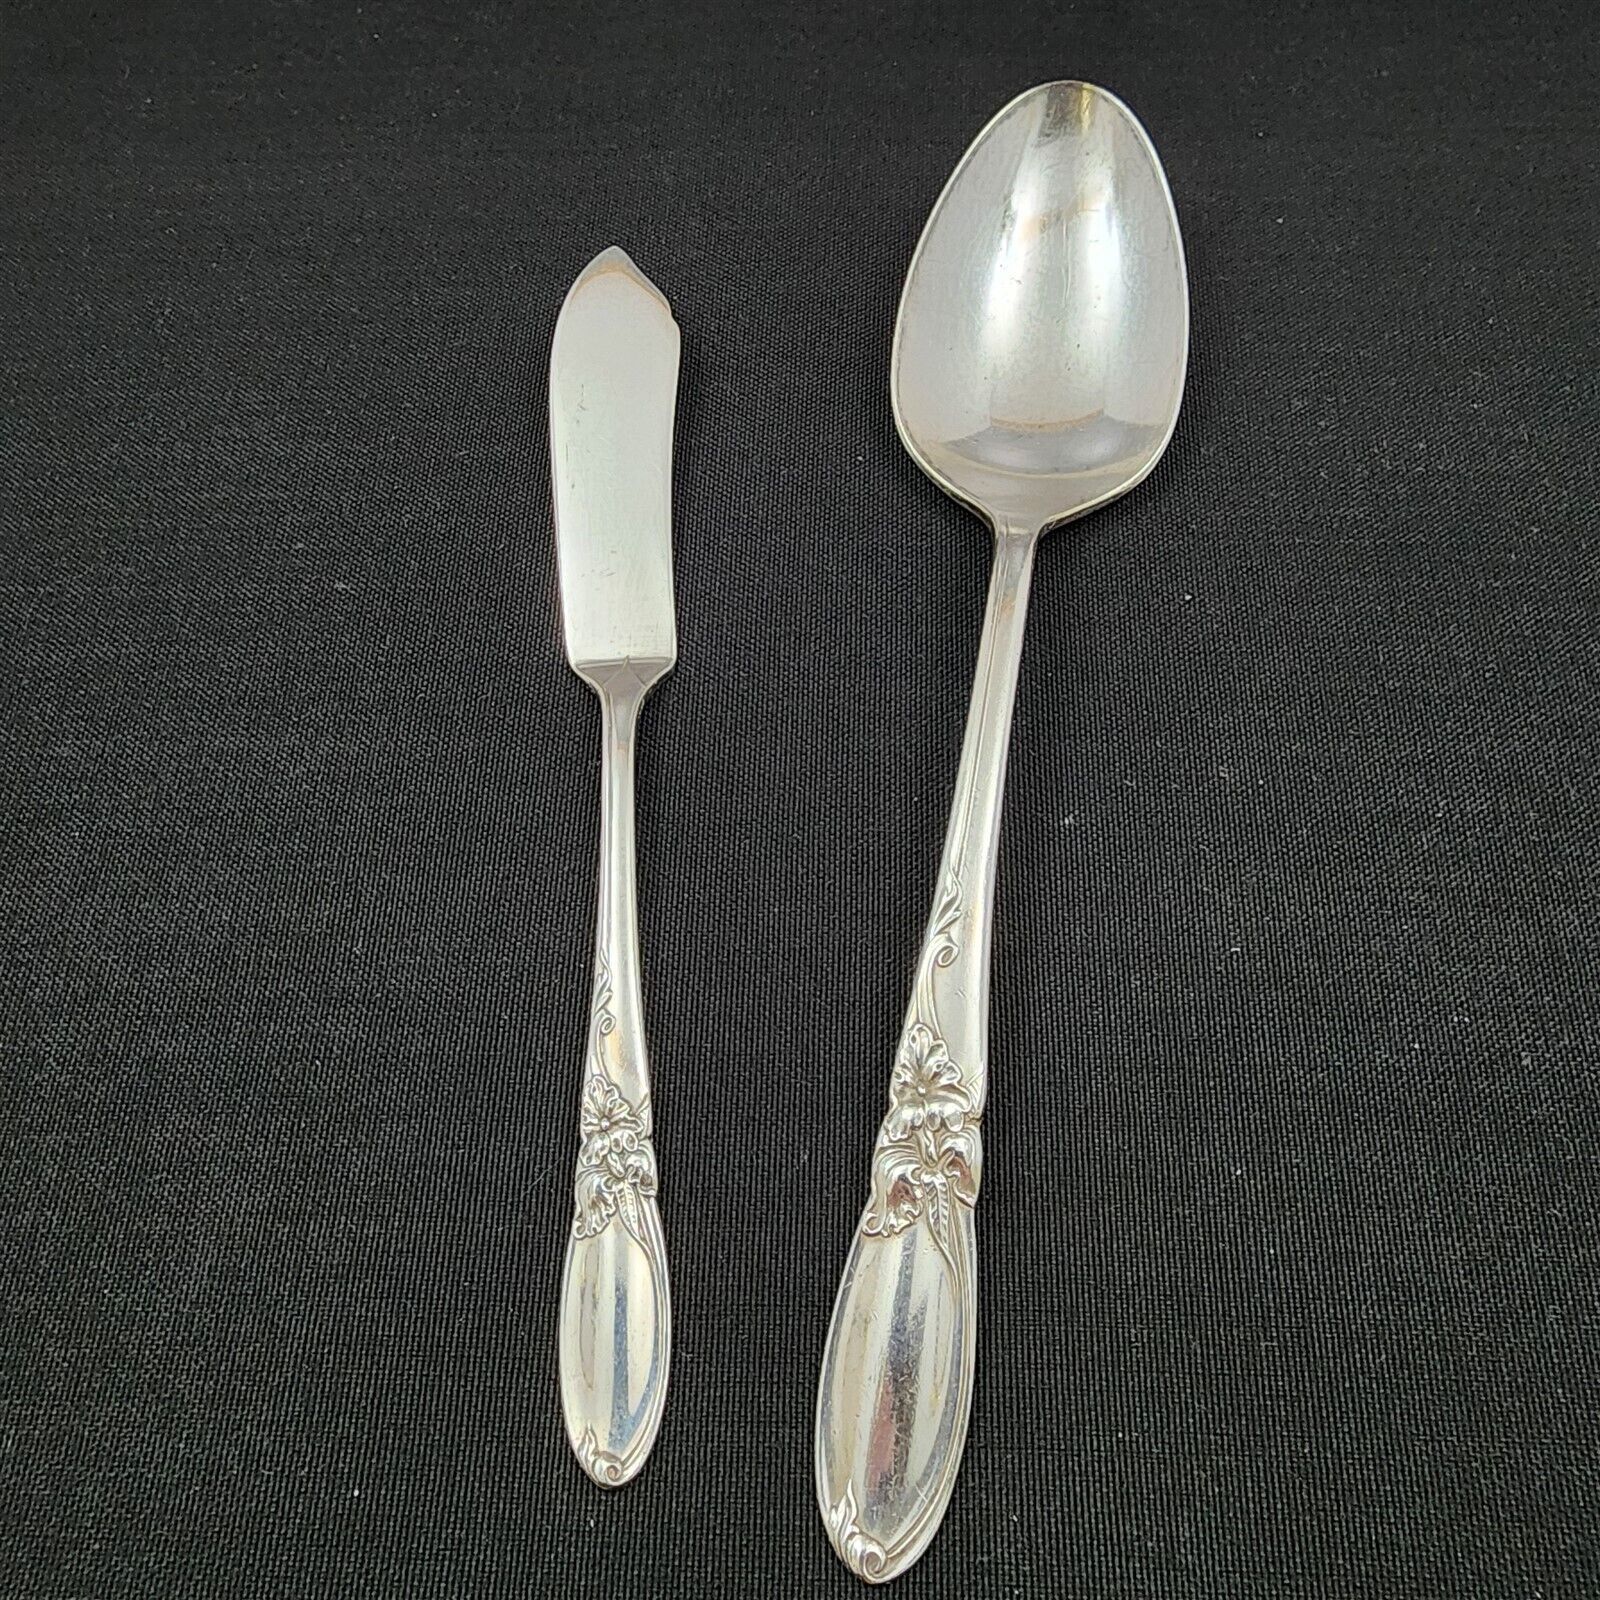 Primary image for Oneida Community 1953 White Orchid Silverplated Butter Spreader & Serving Spoon